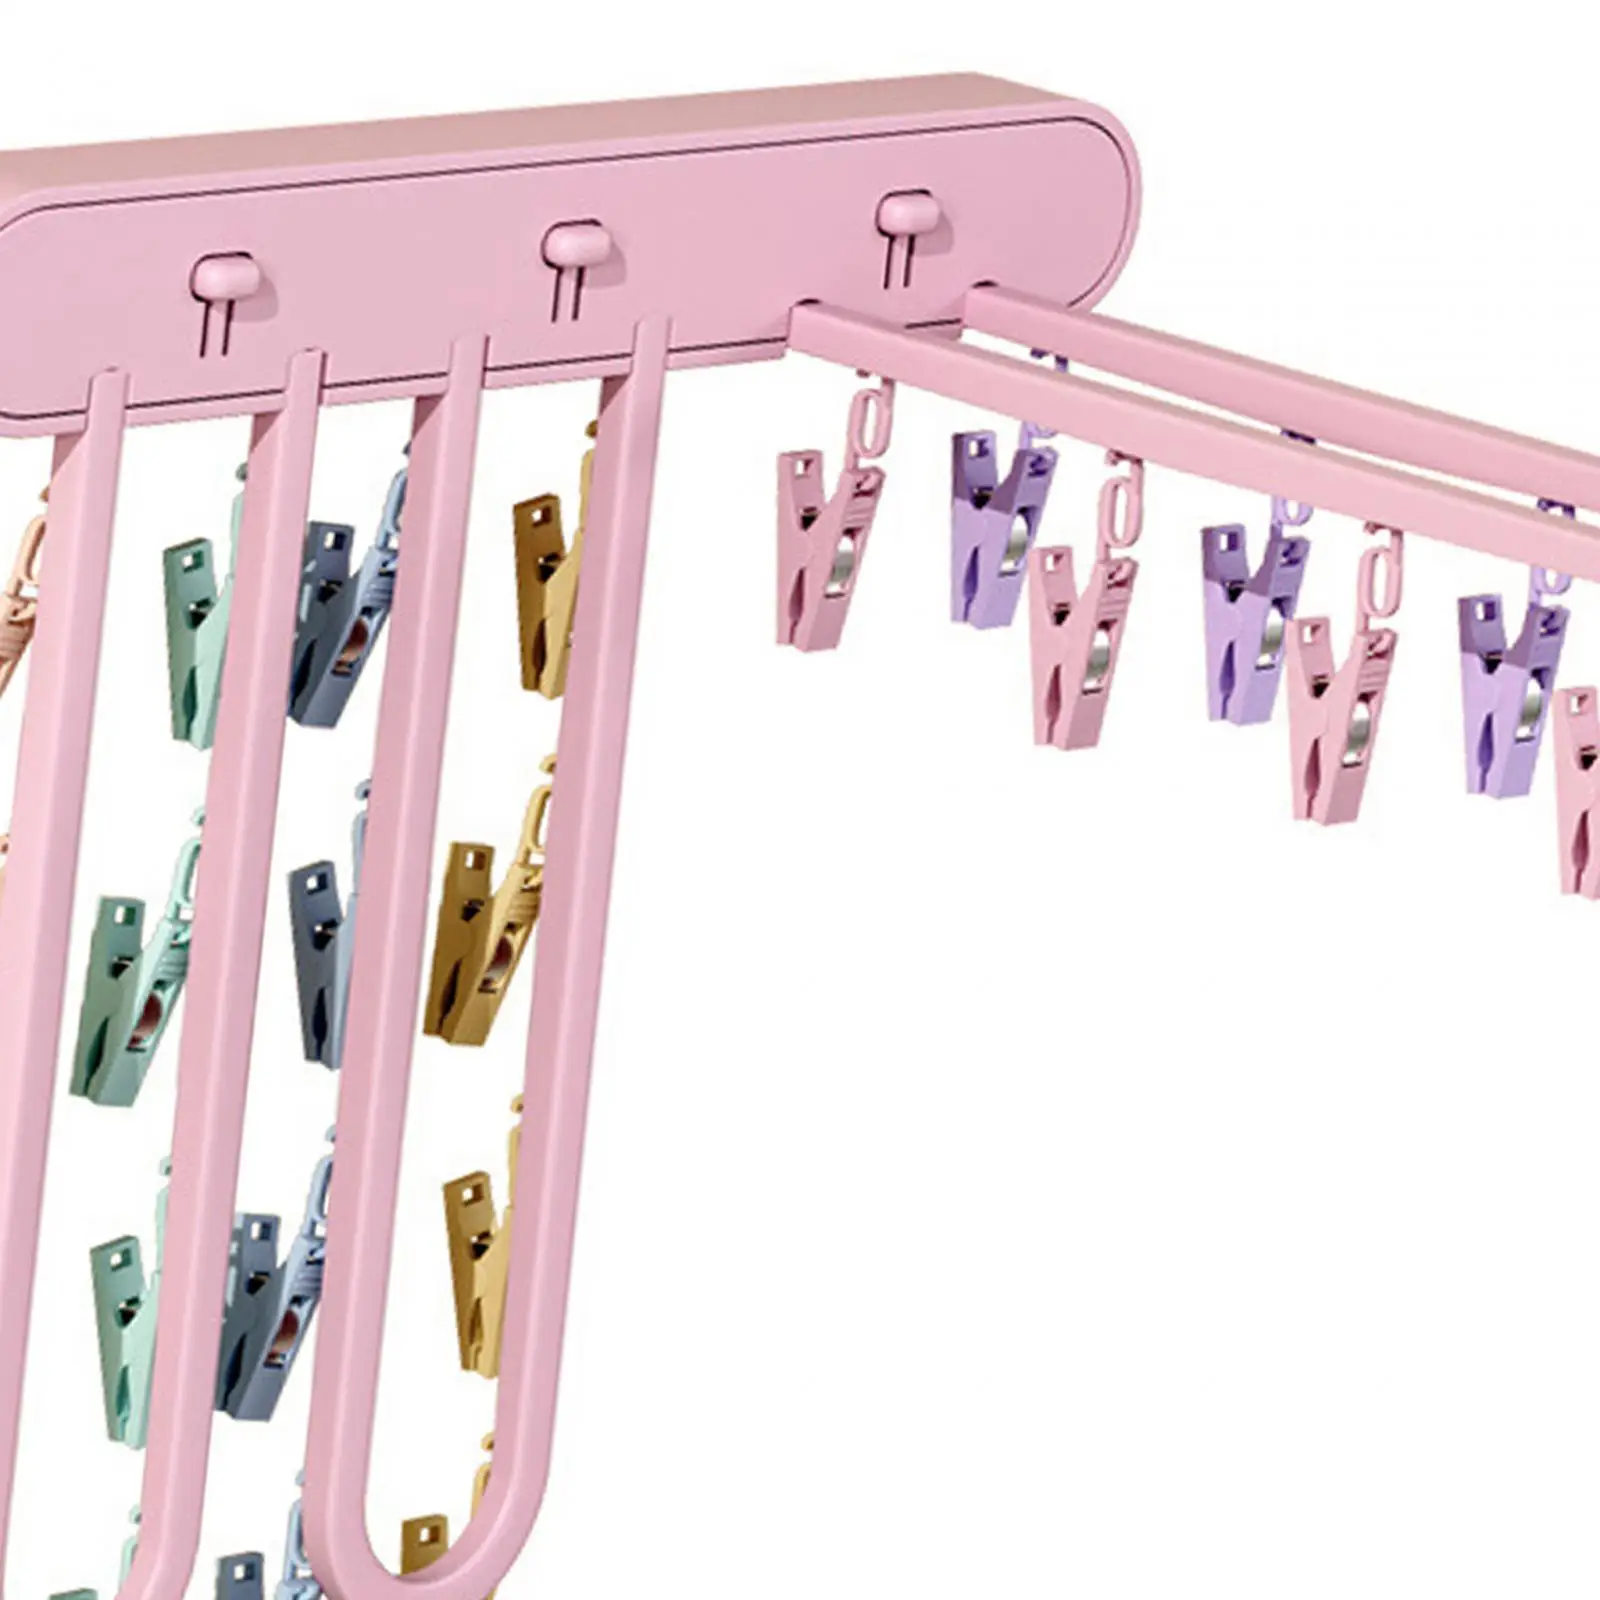 Sock Drying Hanger Rack Stable Foldaway Load Bearing with 24 Clips Bras Clip Hangers for Skirt Outdoor Balcony Indoor Scarf